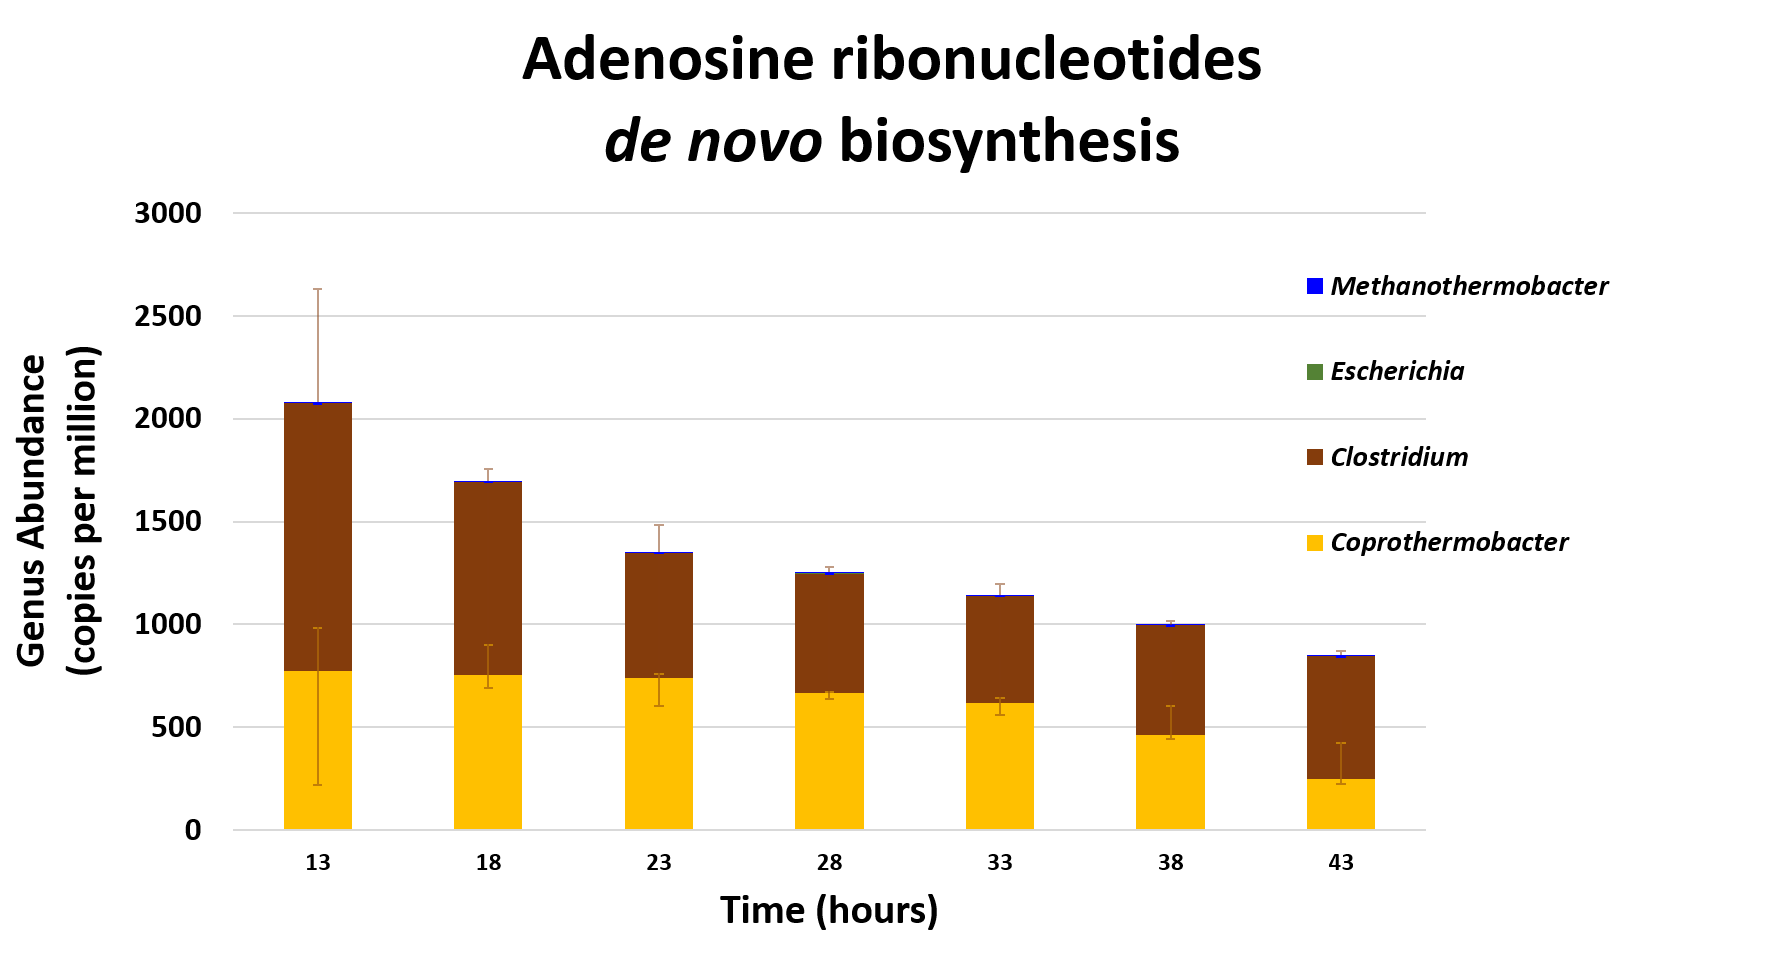 Bar chart titled Adenosine ribonucleotides de novo biosynthesis with time in hours as x axis, and Genus abundance (copies per million). Coprothermobacter and Clostridium decrease from ~2000 combined copies per million to ~800, in approximately equal amounts.